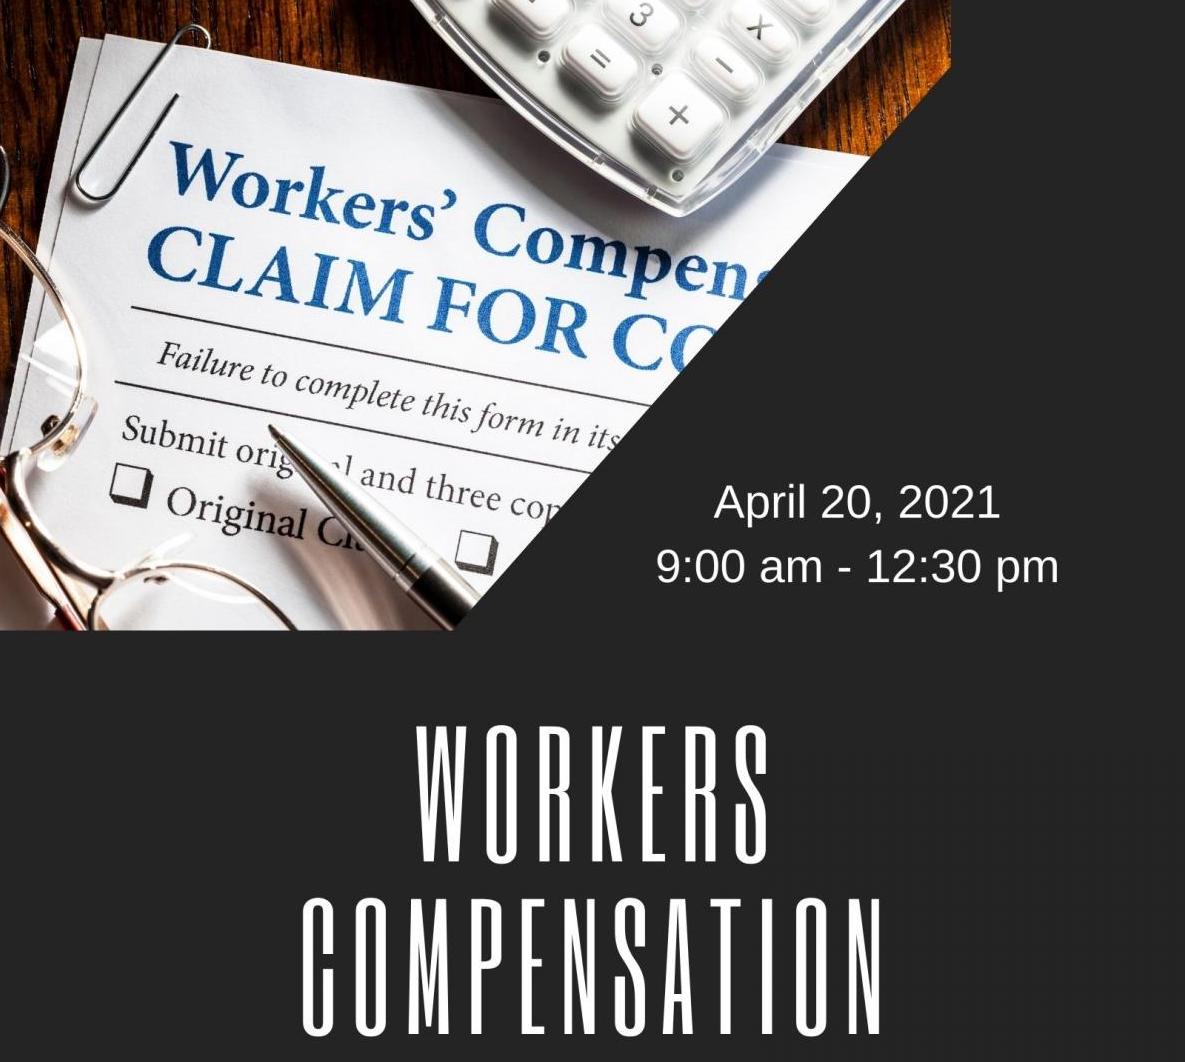 Workers Compensation in South Carolina